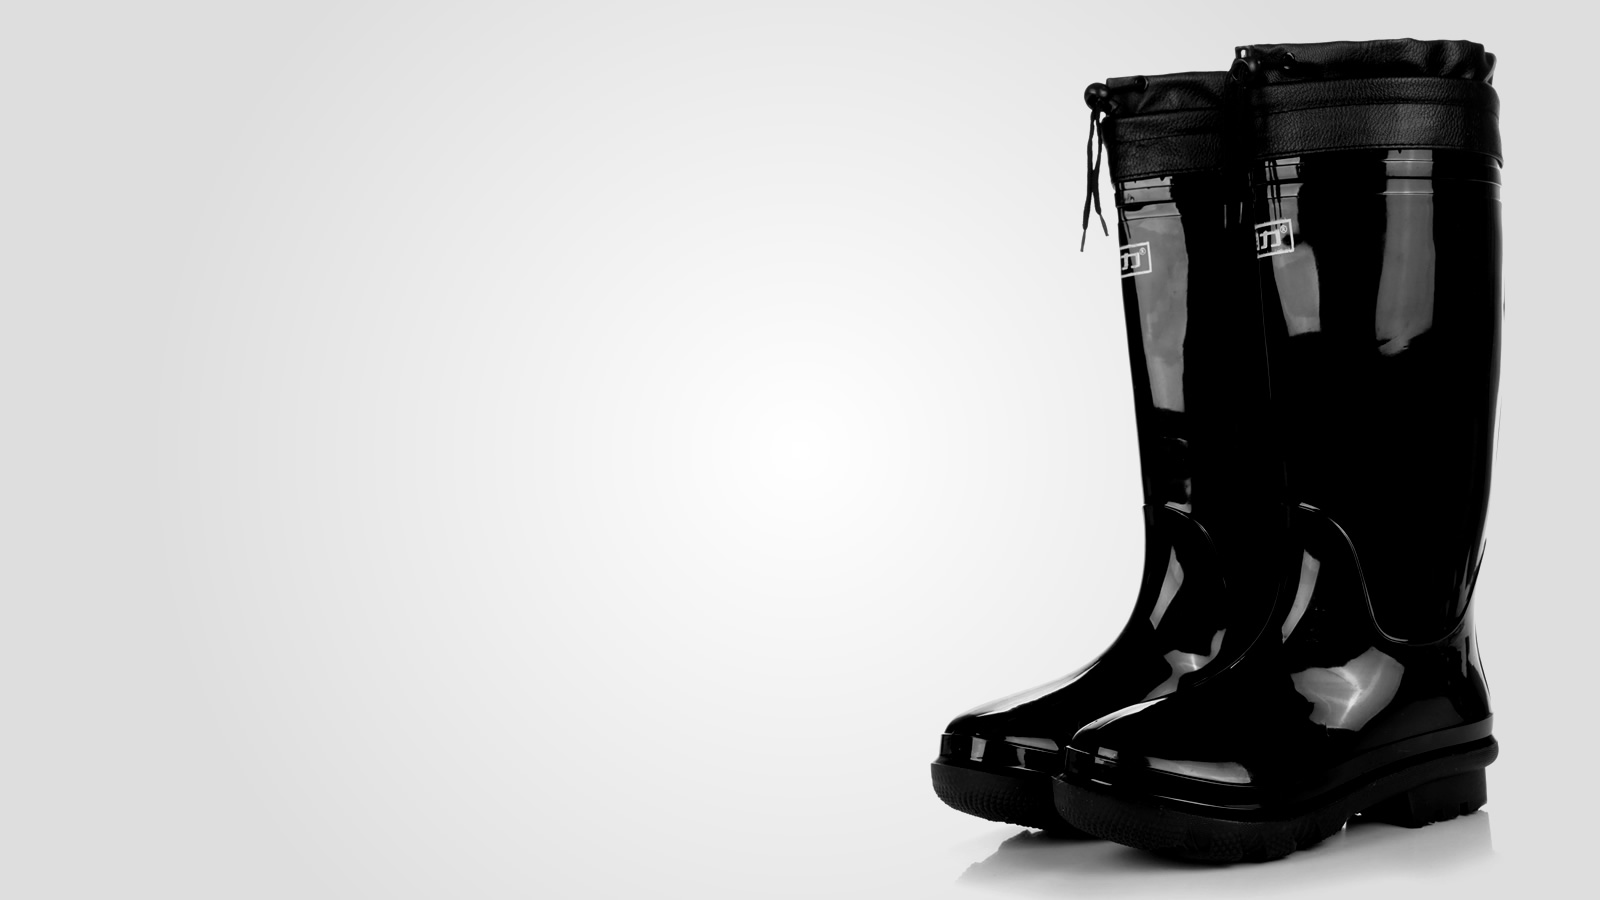 A pair of rubber water boots